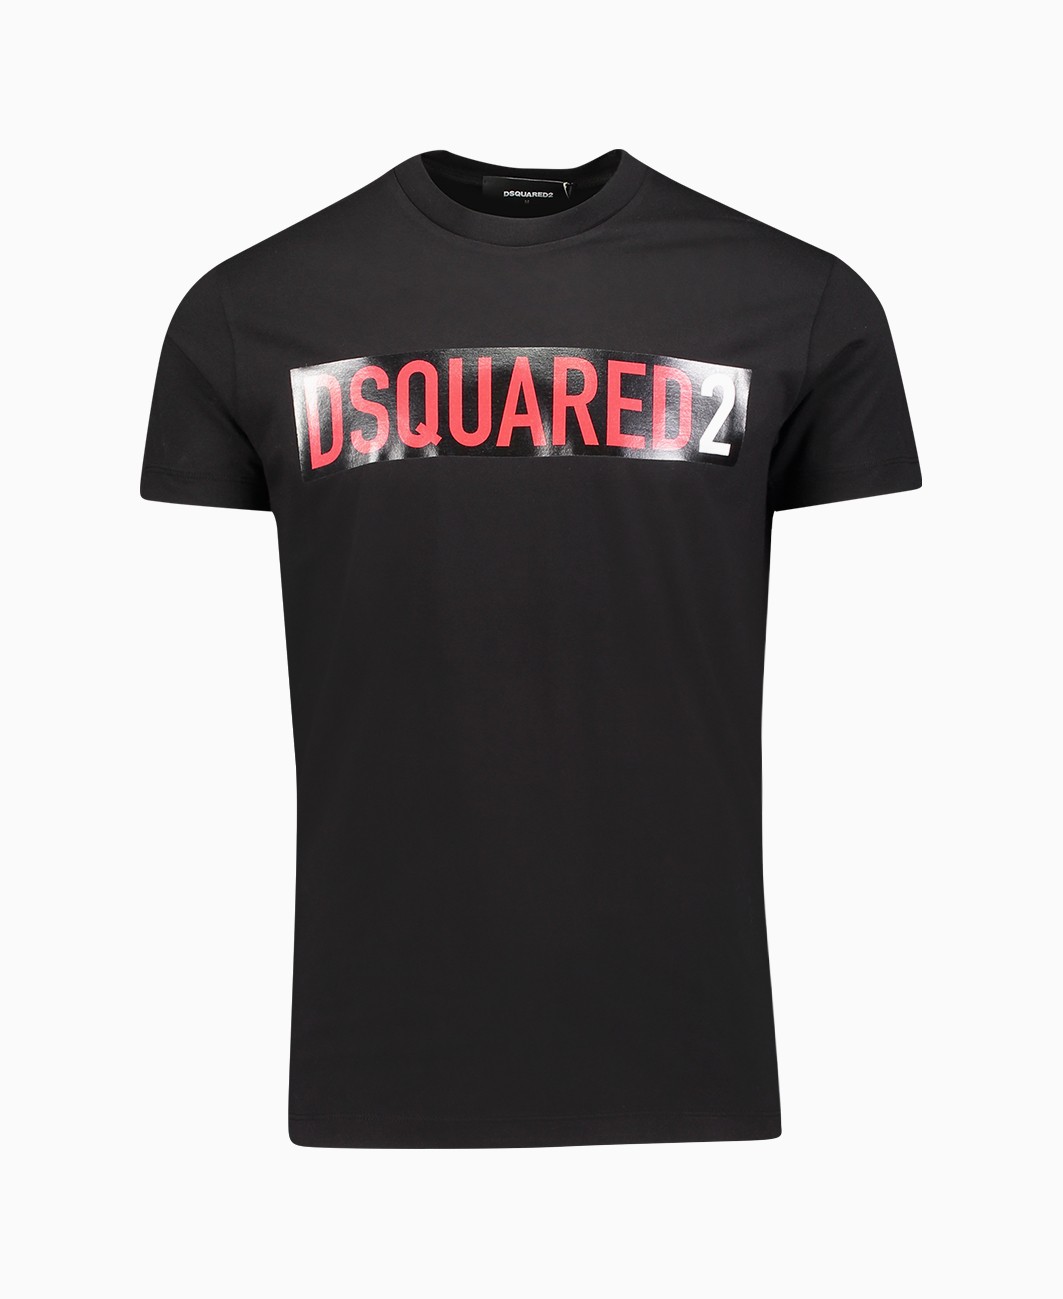 Dsquared 2 Black/Red T-Shirt - Rogue